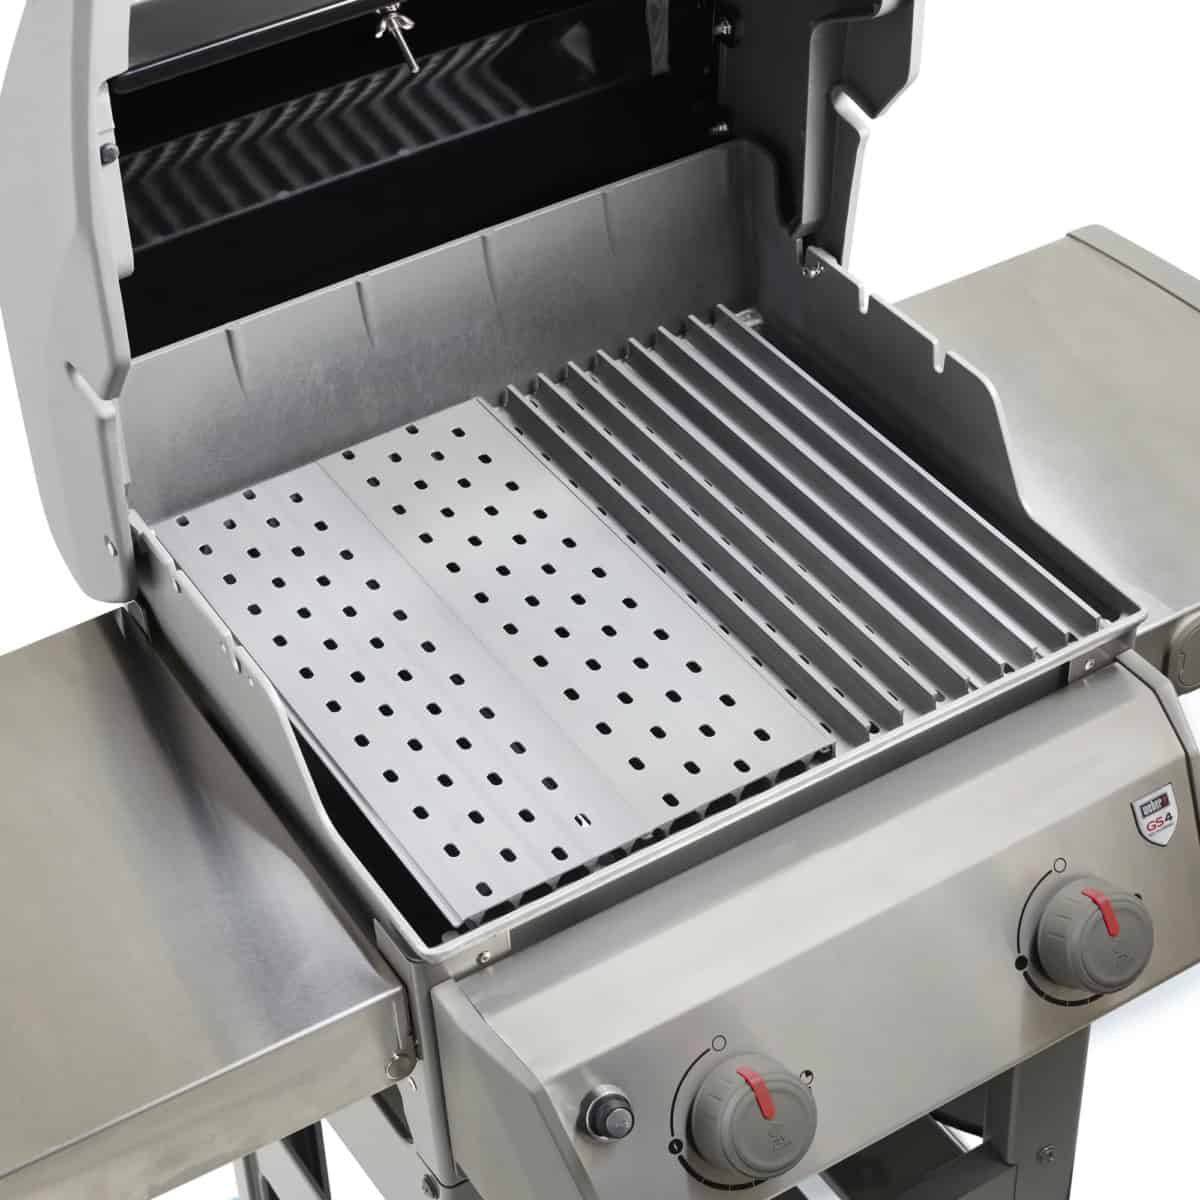 A gas grill with two different sets of grill grates installed.